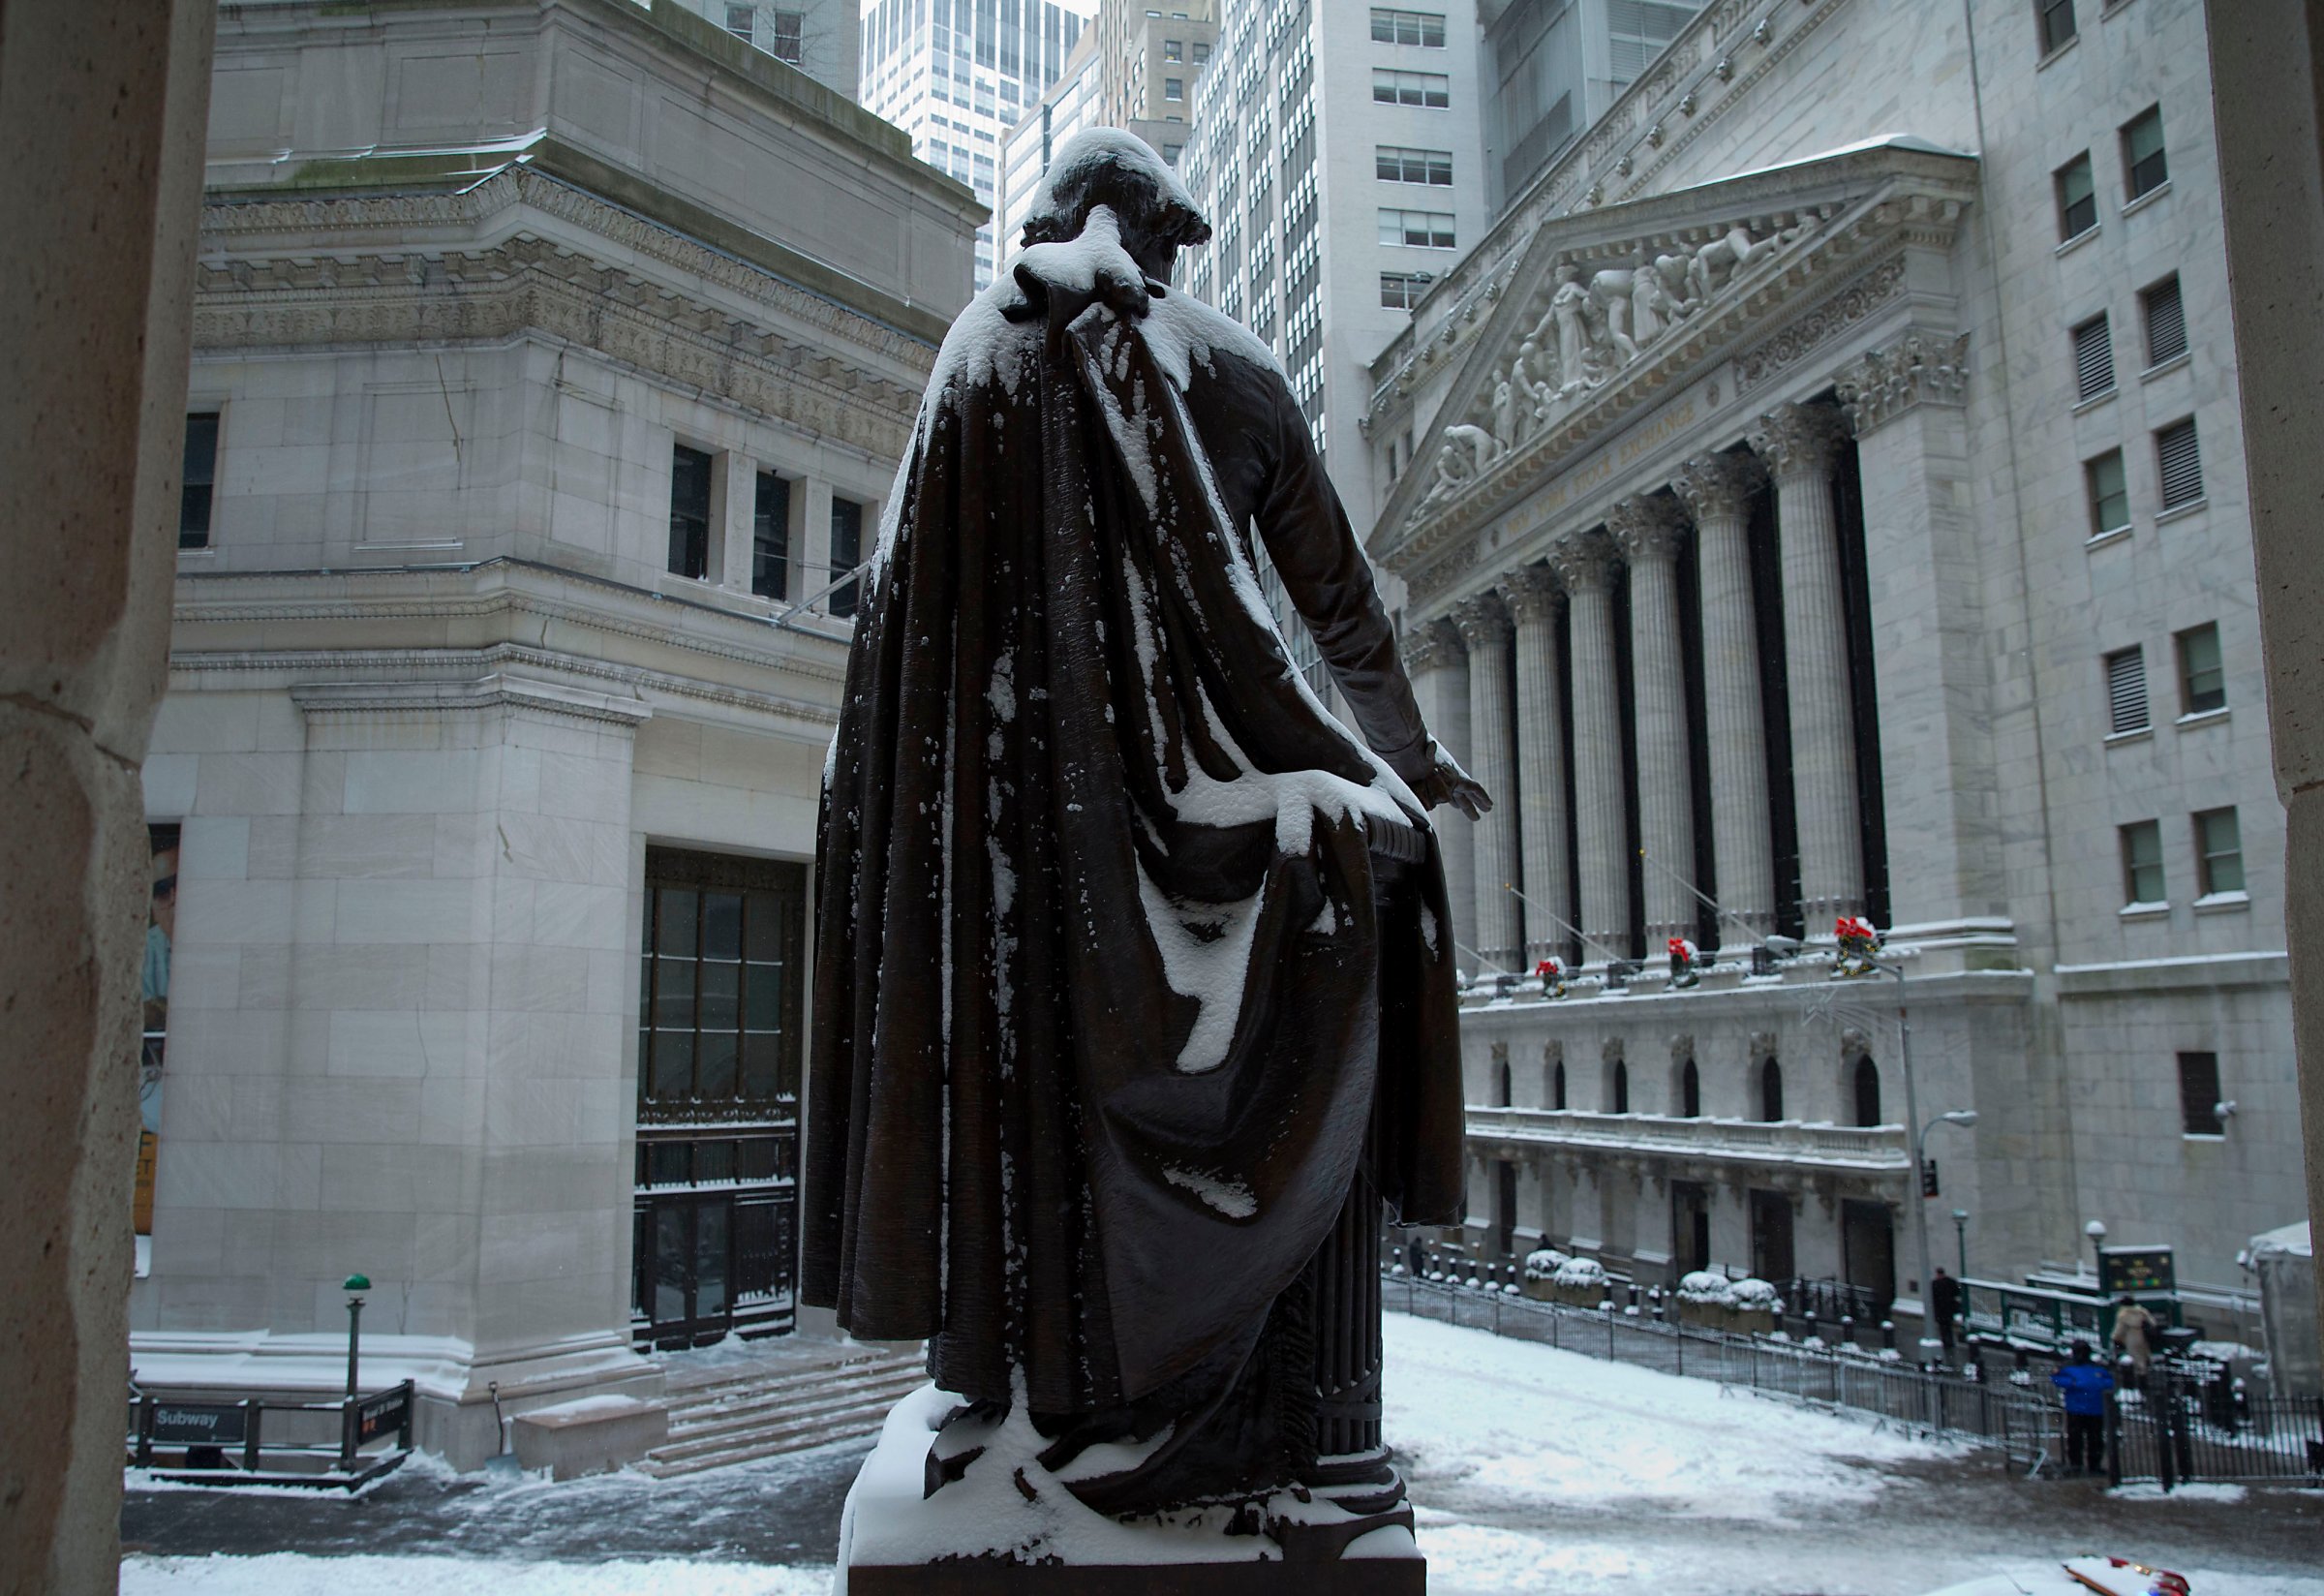 The George Washington statue stands covered in snow near the New York Stock Exchange (NYSE) in New York, U.S. Wind-driven snow whipped through New Yorks streets and piled up in Boston as a fast-moving storm brought near-blizzard conditions to parts of the Northeast, closing roads, grounding flights and shutting schools.